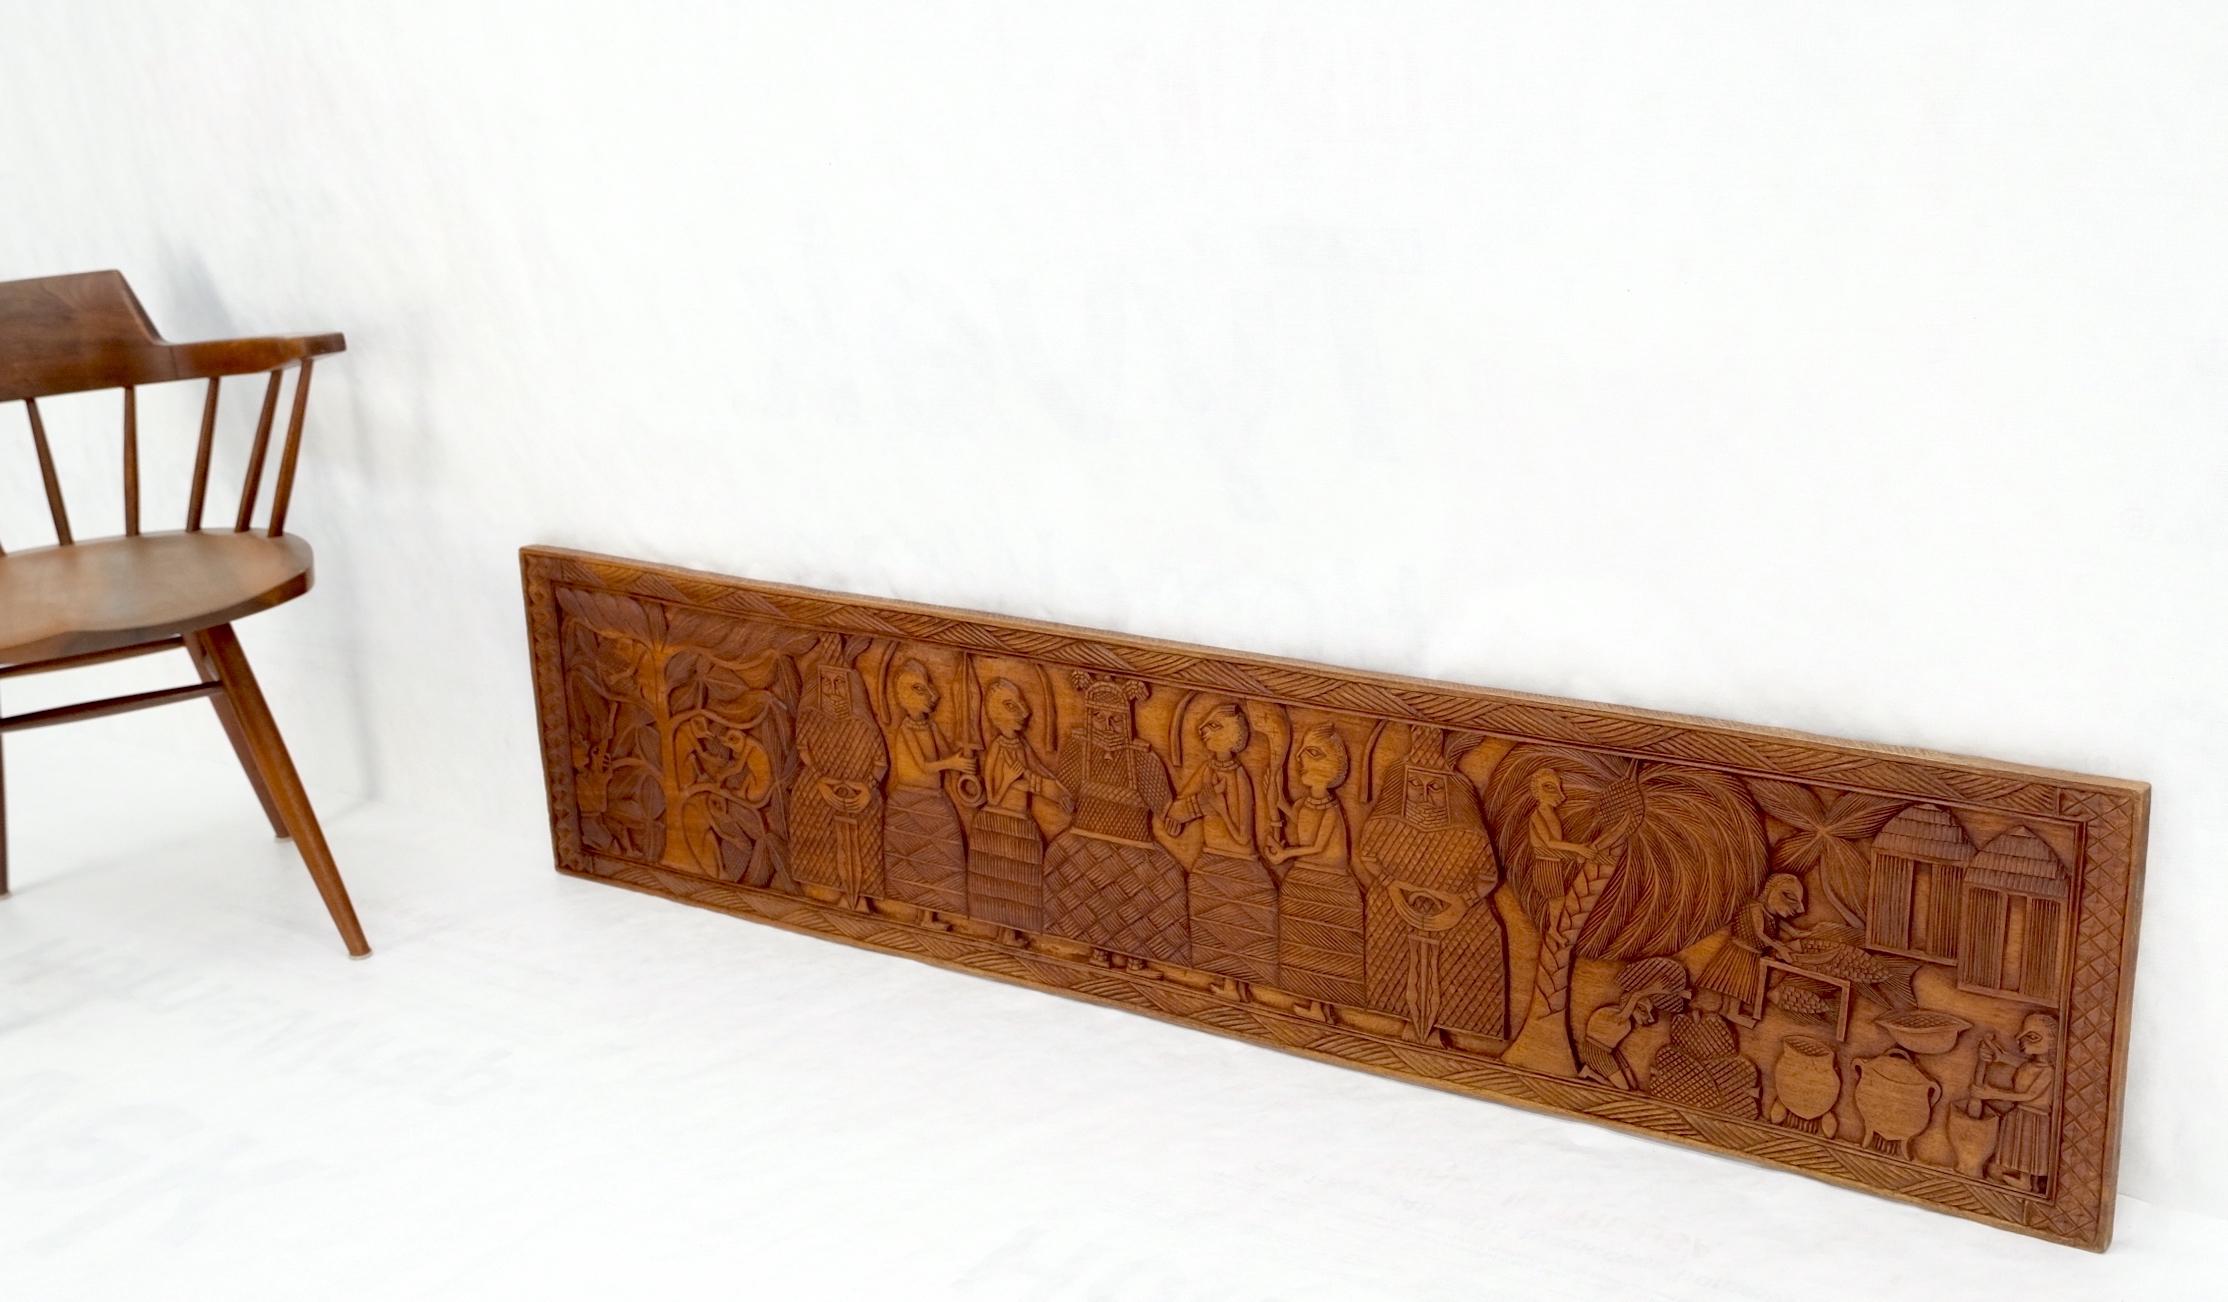 Carved Solid Teak Long Rectangle Wall Plaque Relief Sculpture Depicting Villager In Good Condition For Sale In Rockaway, NJ